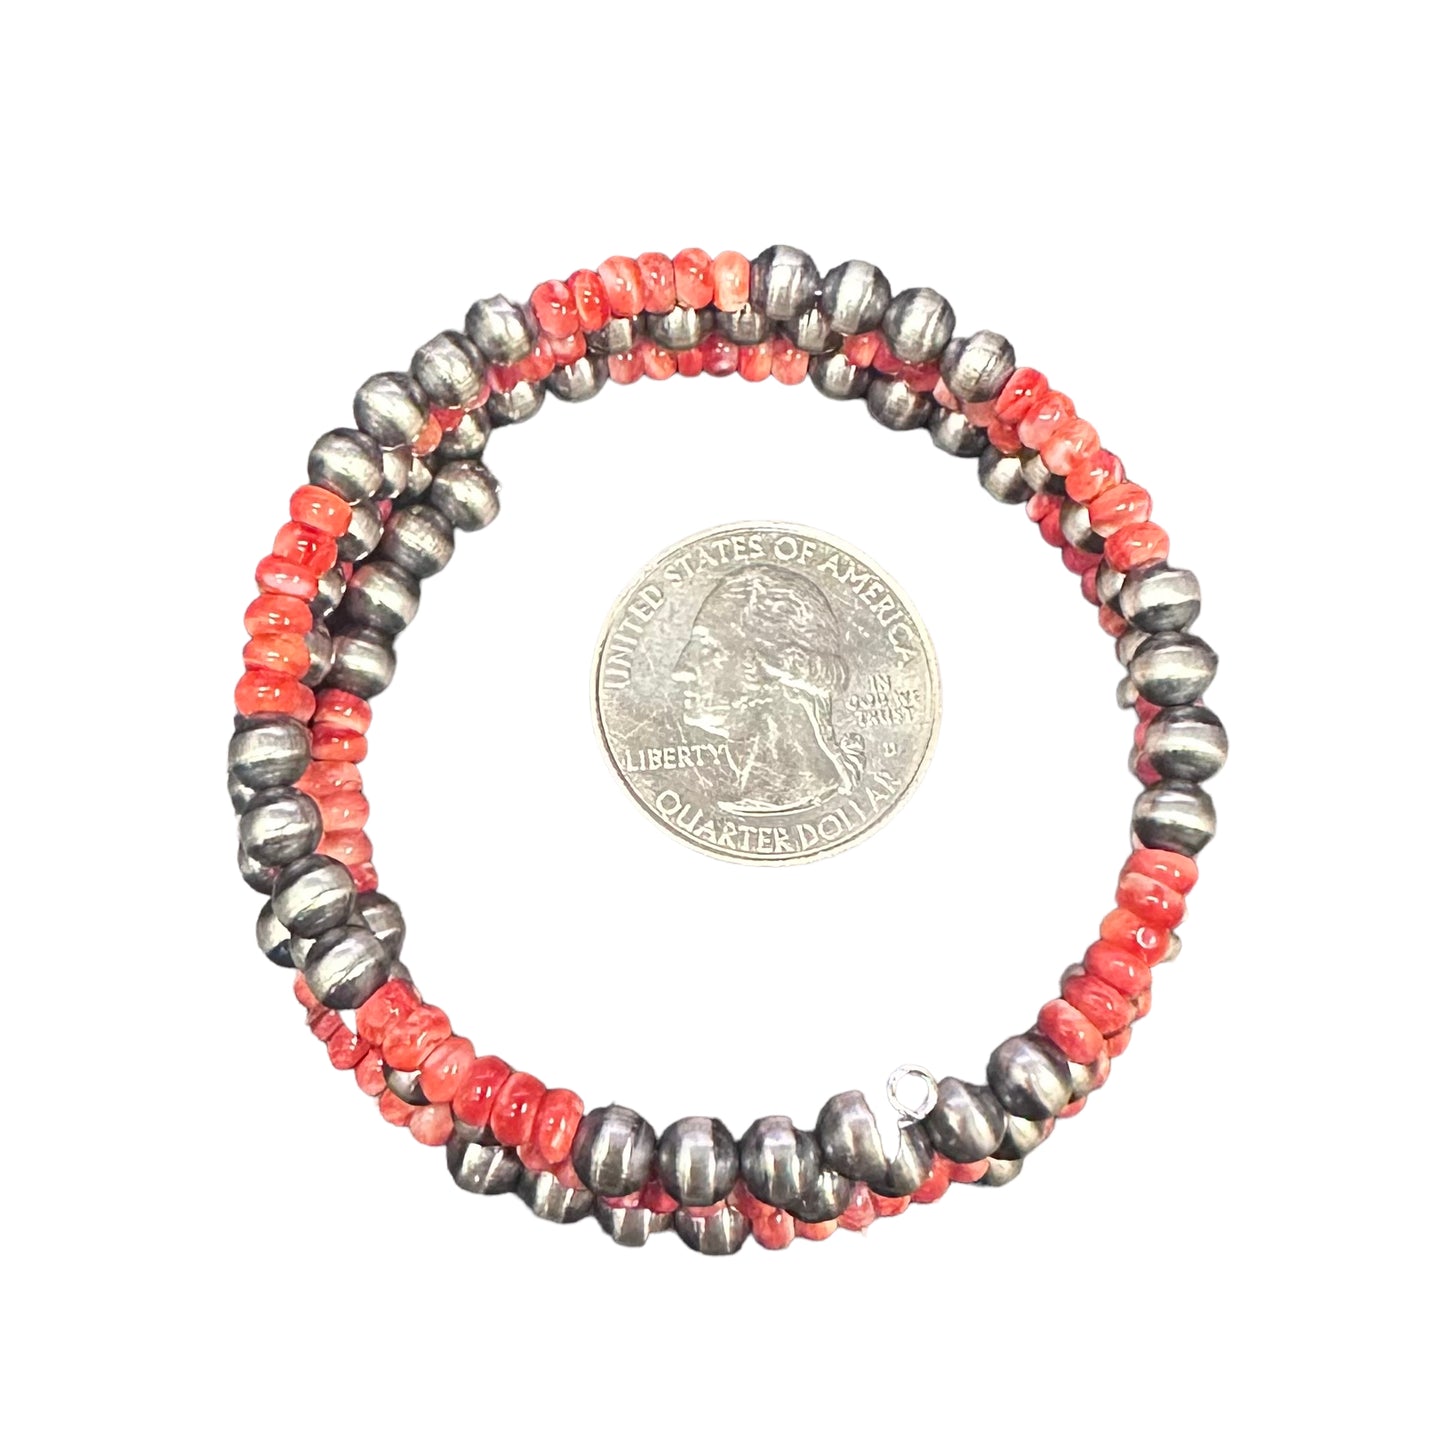 Red Spiny Oyster Navajo Pearl Oxidized Bead Wrap Bracelet Sterling Silver